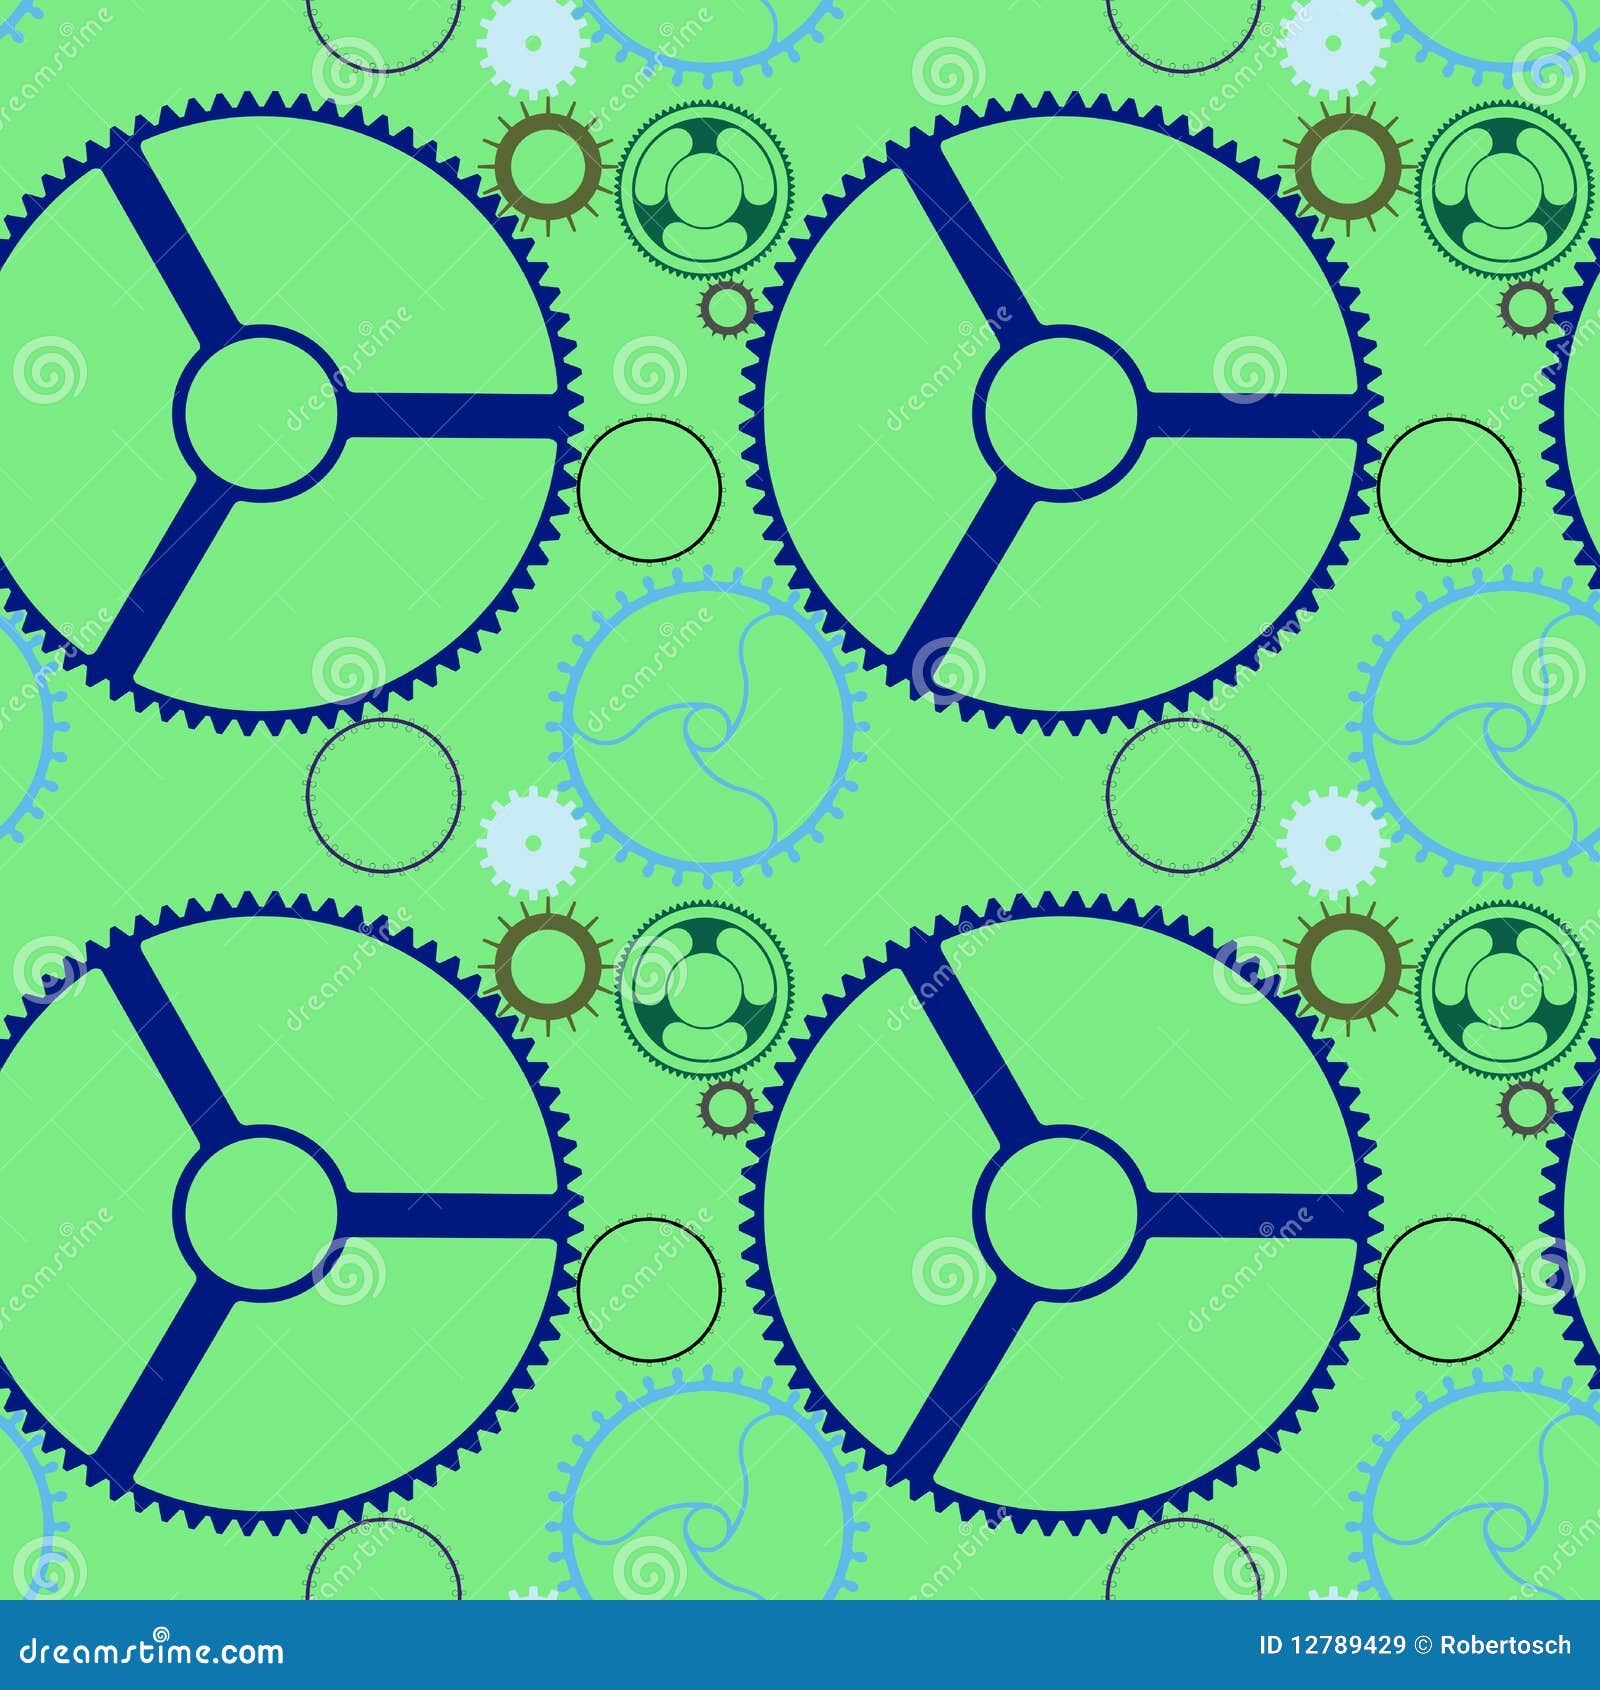 Mechanic Wheels Seamless Pattern Extended Royalty Free Stock Images ...